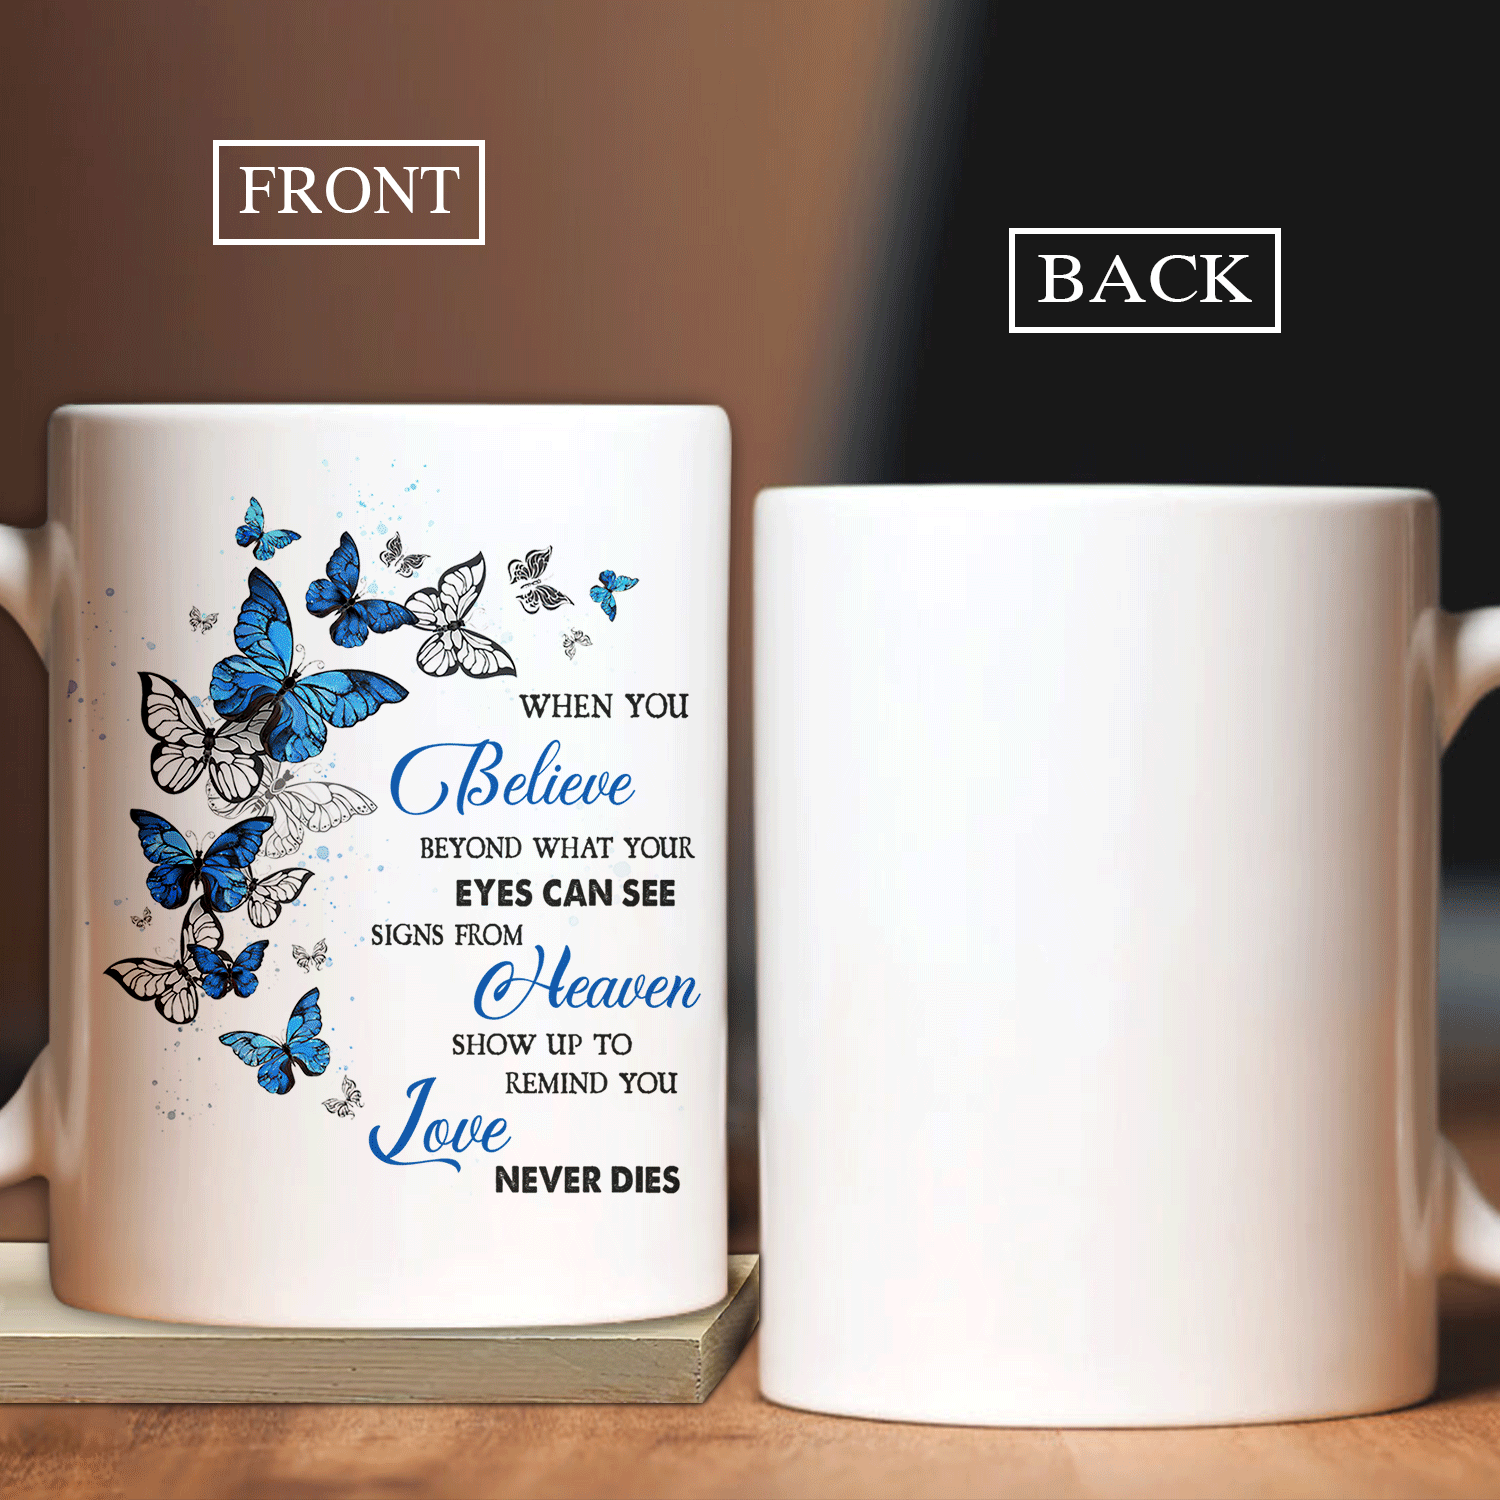 Memorial White Mug - Blue butterfly, Animal pattern- Gift For Member Family- Signs from heaven show up to remind you love never dies - Heaven White Mug